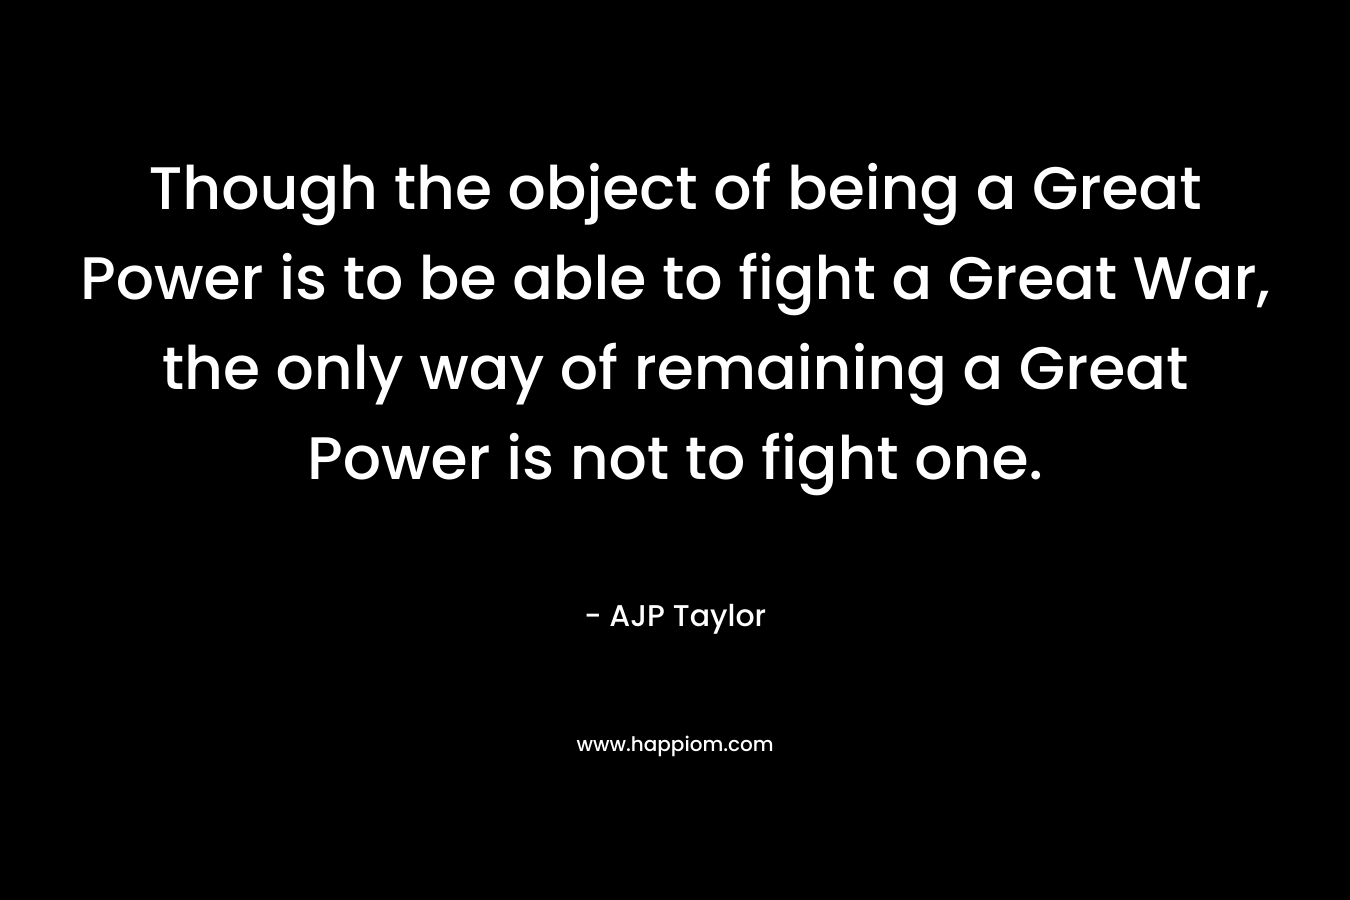 Though the object of being a Great Power is to be able to fight a Great War, the only way of remaining a Great Power is not to fight one. – AJP Taylor